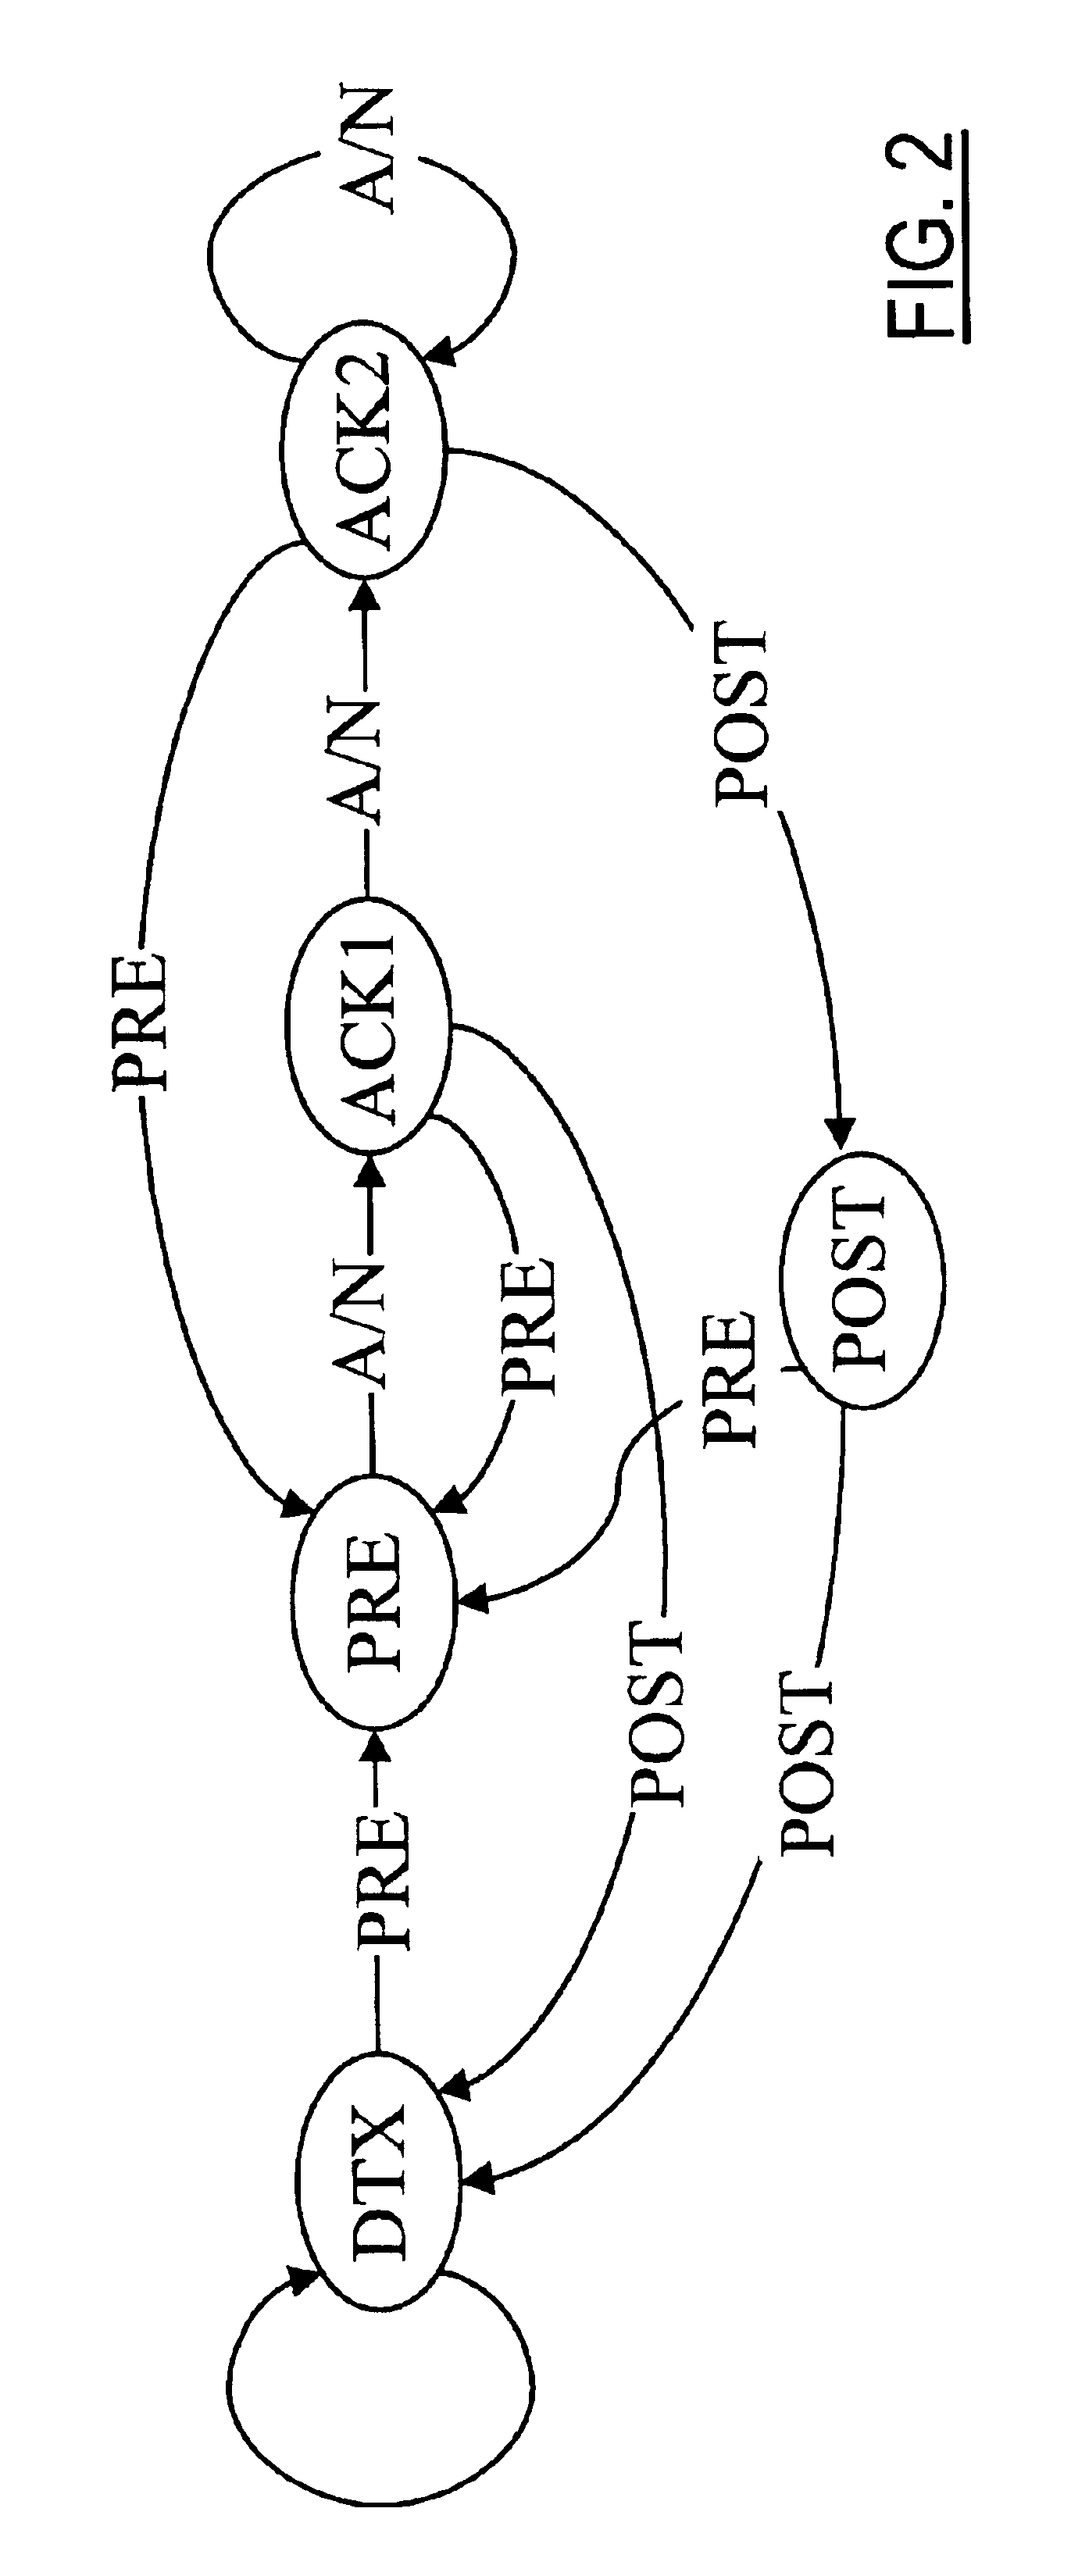 Method and apparatus for HS-DPCCH signalling with activity information in HSDPA